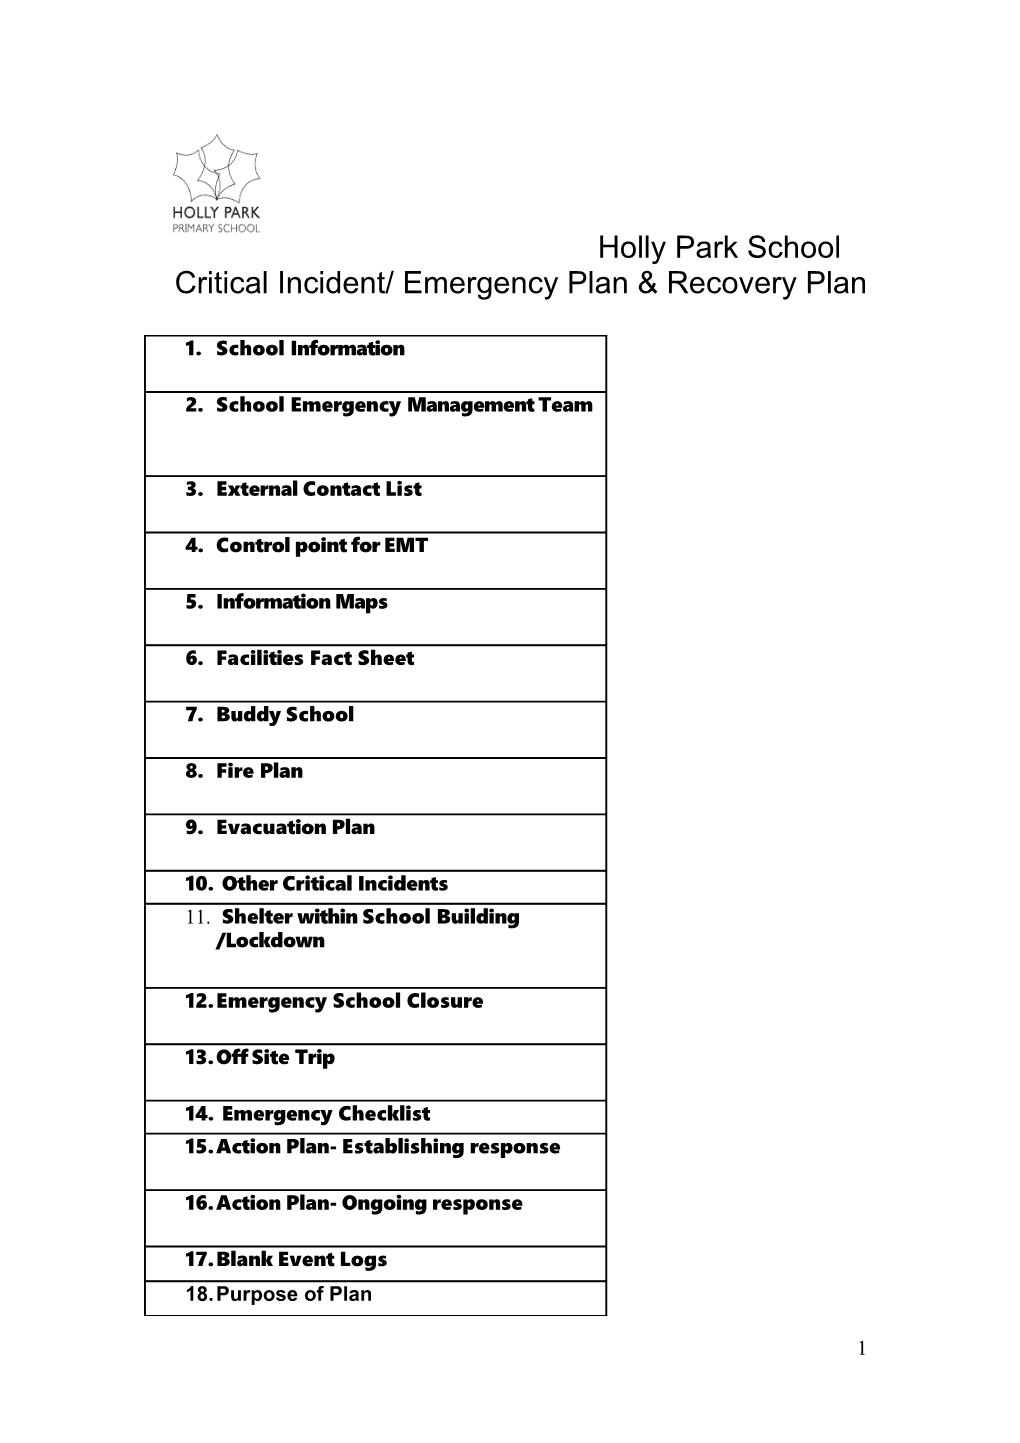 Critical Incident/ Emergencyplan & Recovery Plan